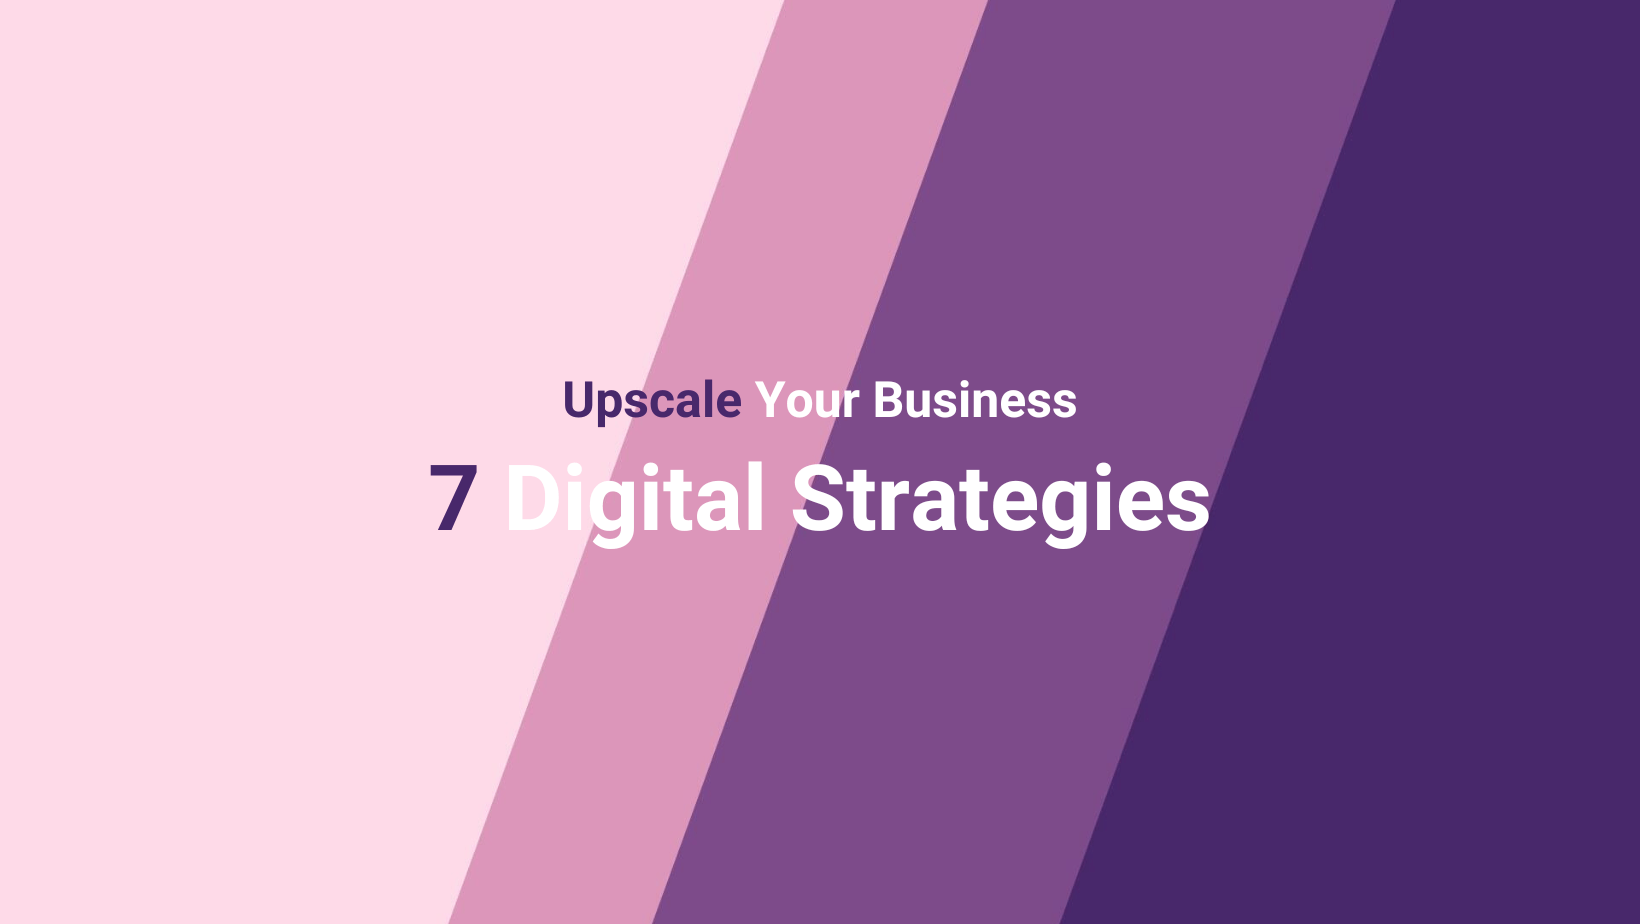 7 Digital Strategies to Upscale Your Business!